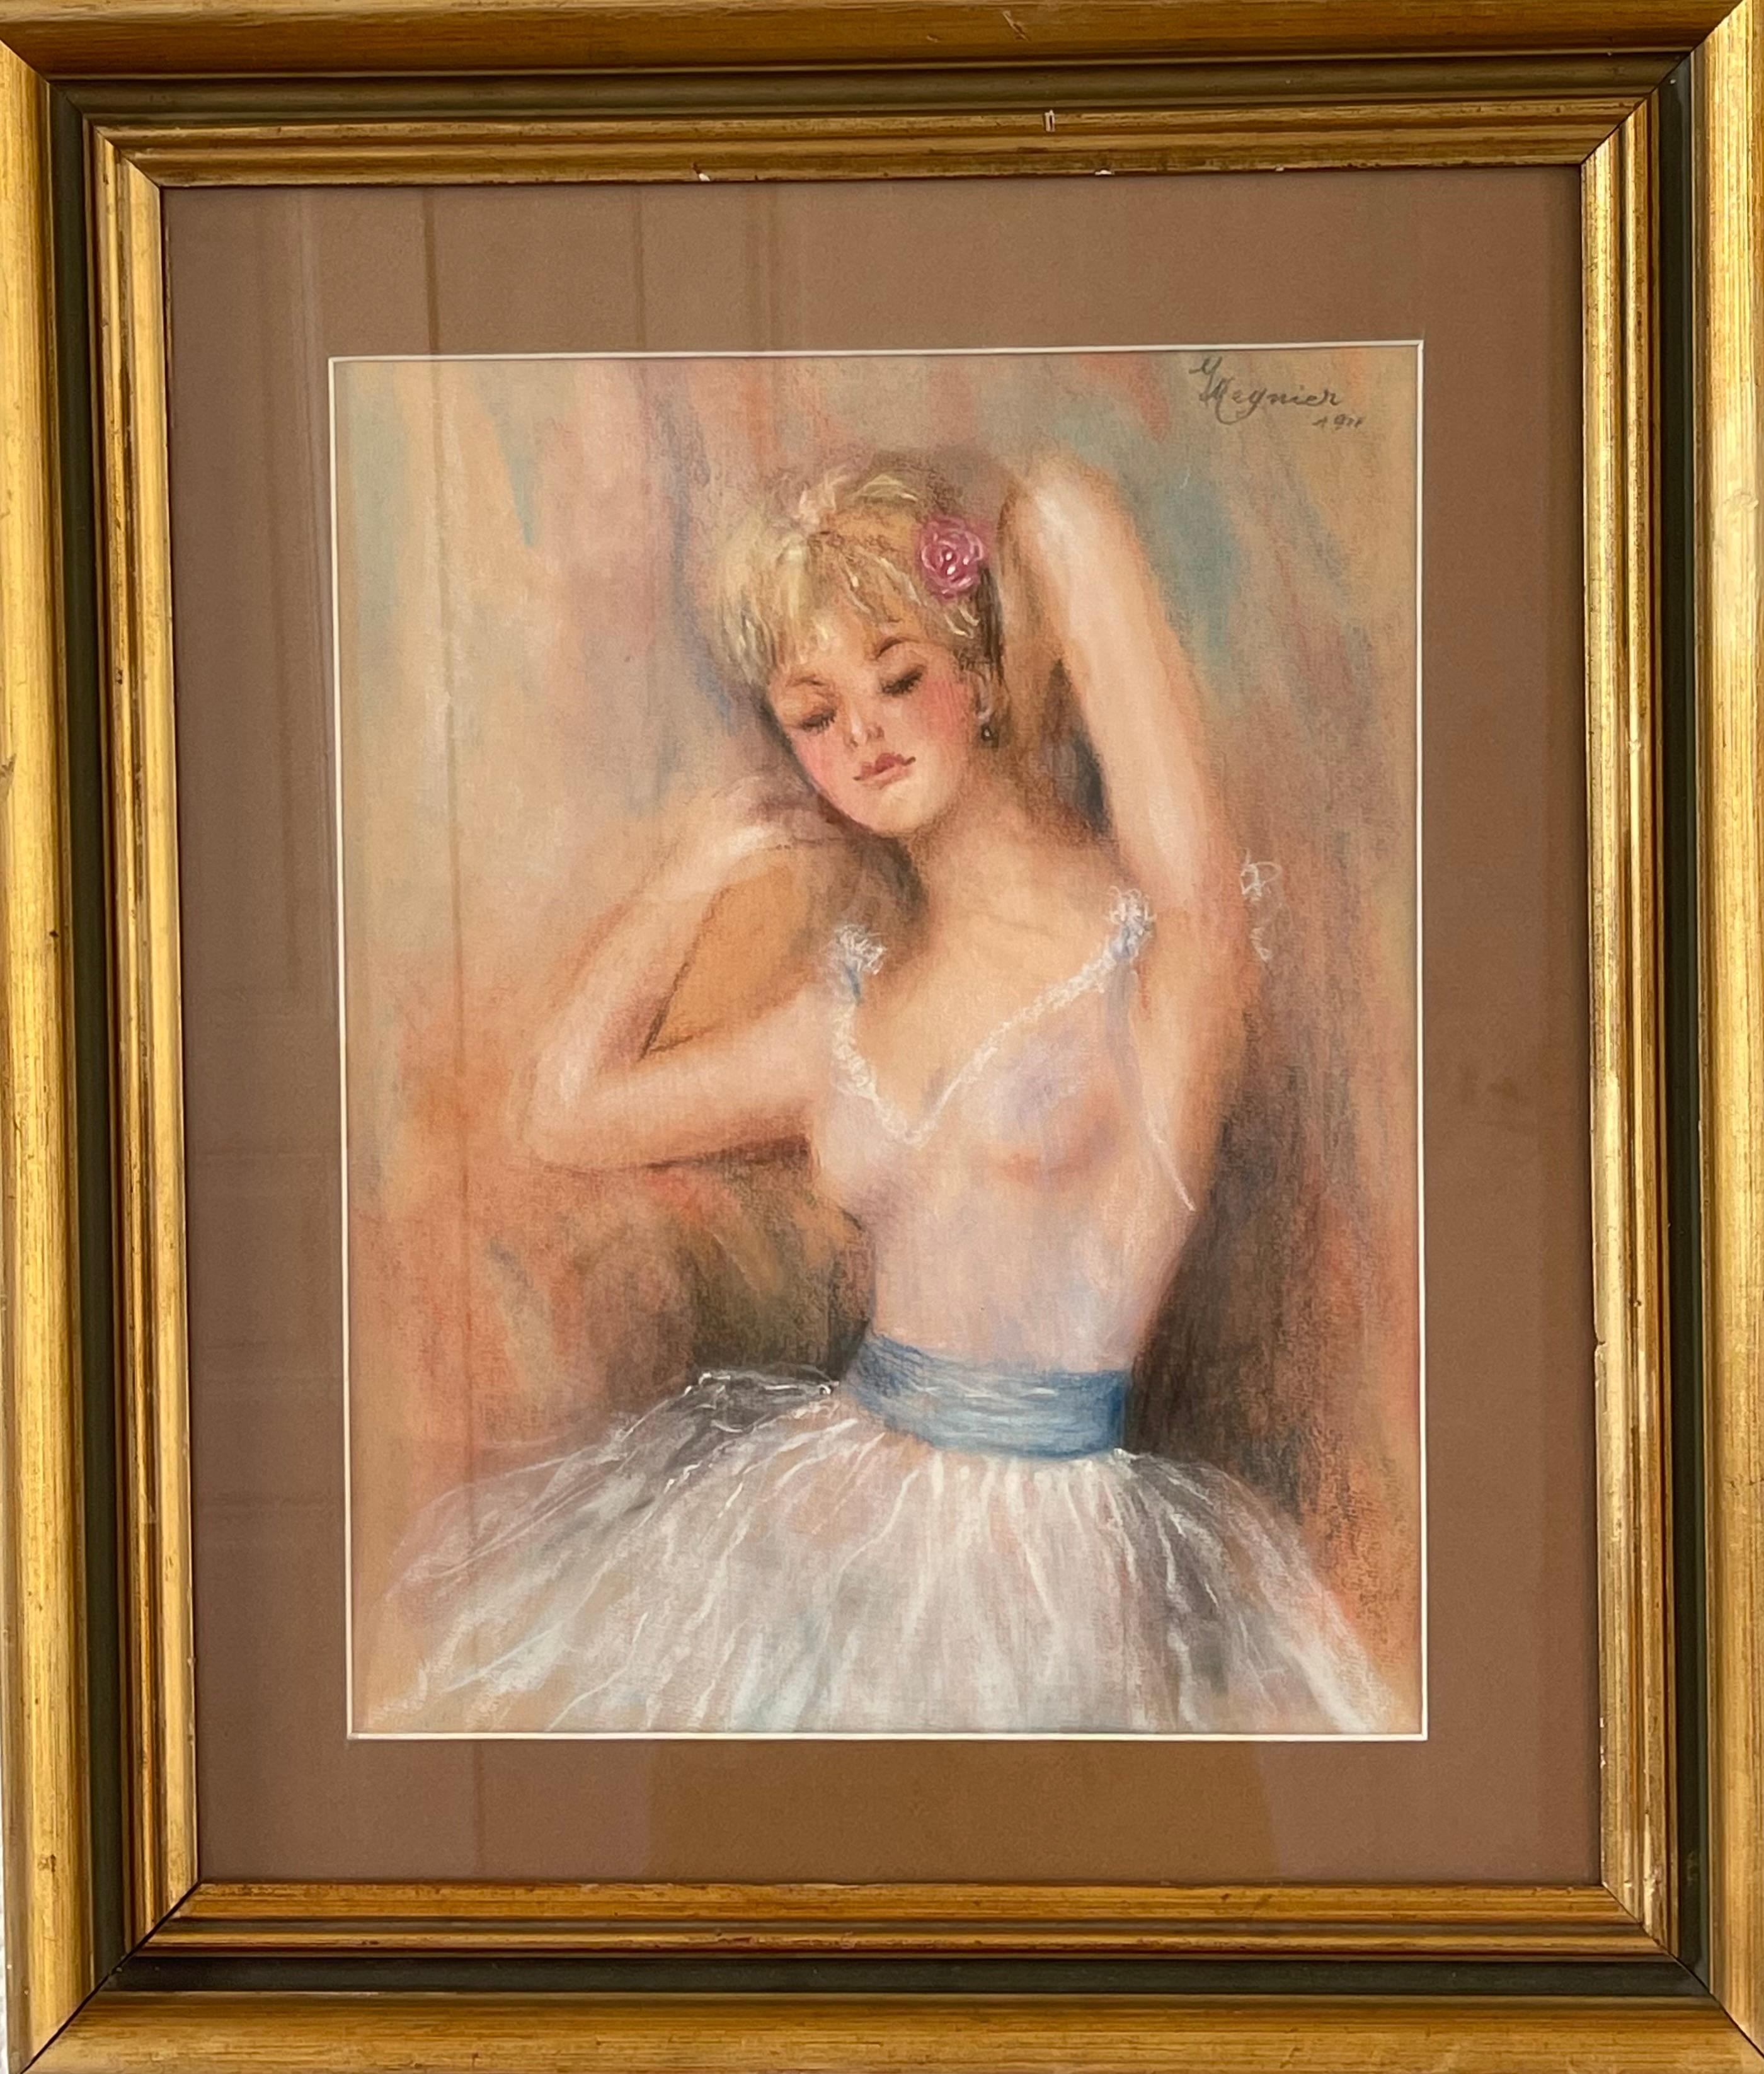 This beautifully framed painting by Meynier depicts a blonde woman dressed in ballet attire, wearing a white leotard and tutu adorned with a blue belt. The woman is shown with her eyes closed, arms raised gracefully in a dance pose.

The painting